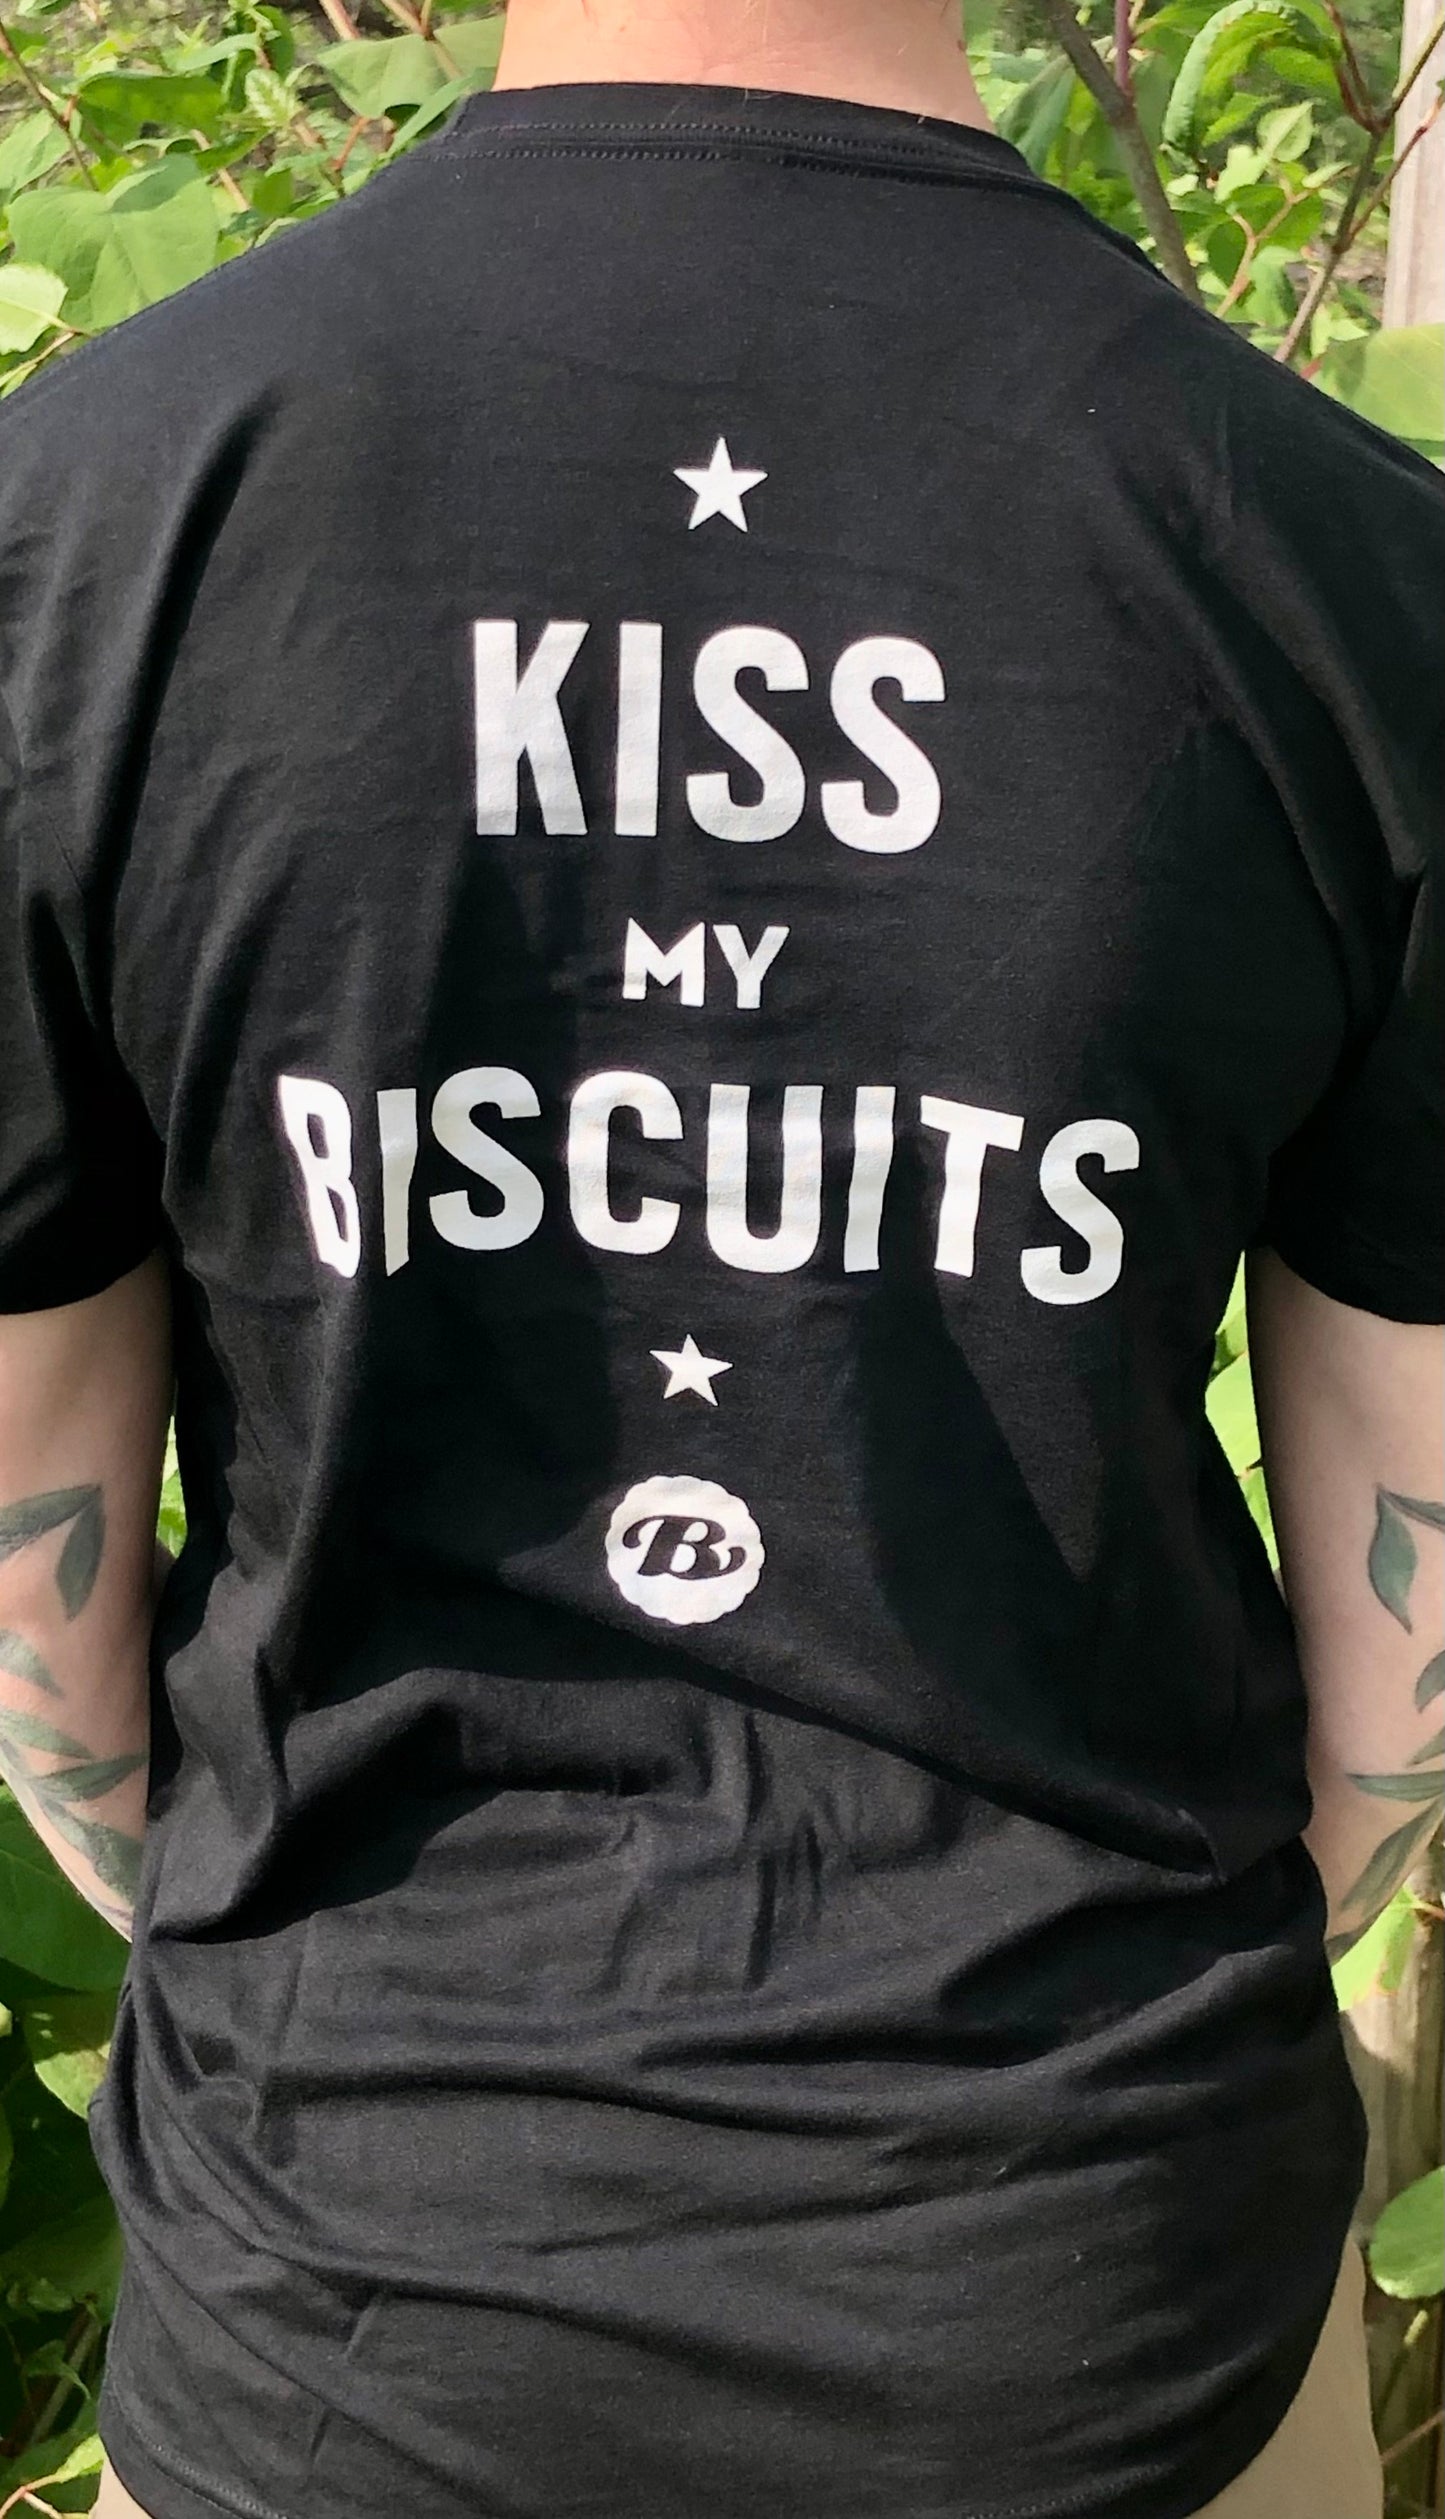 "Kiss my Biscuits"